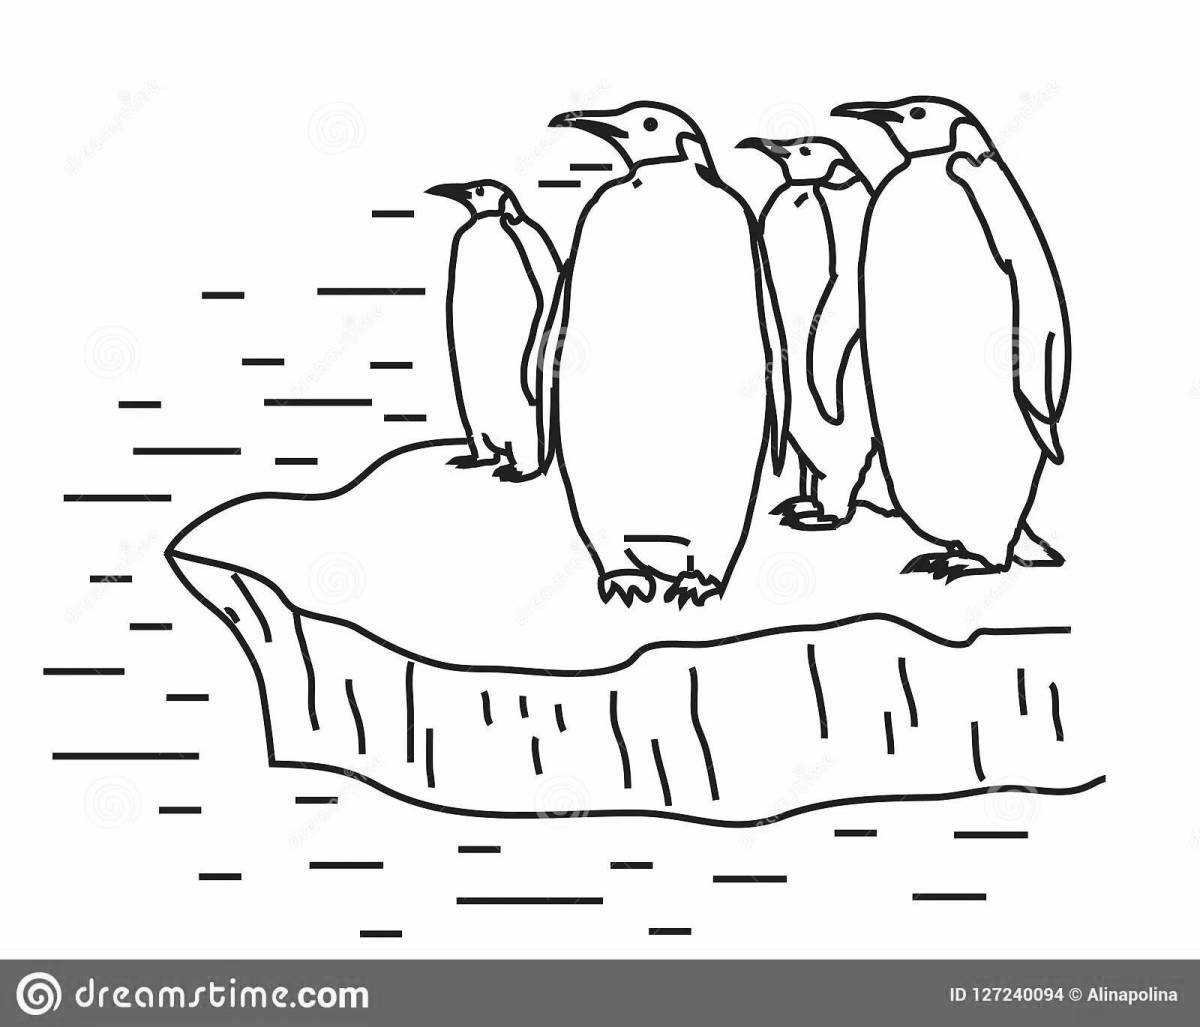 Fancy penguin on an ice floe coloring pages for kids